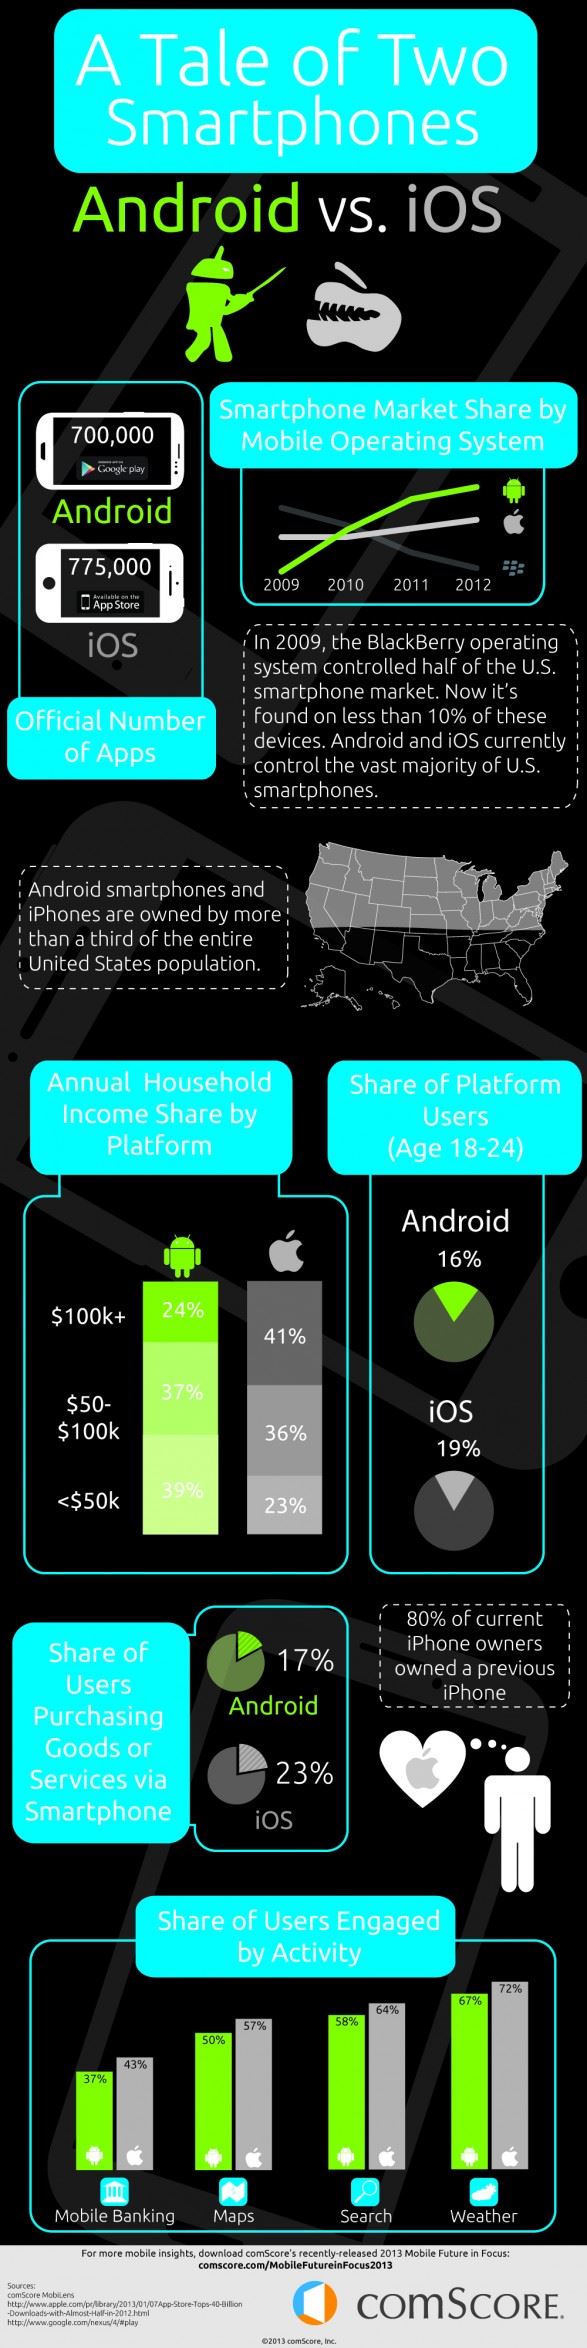 INFOGRAPHIC: What Developers Should Know About Android Vs. iOS